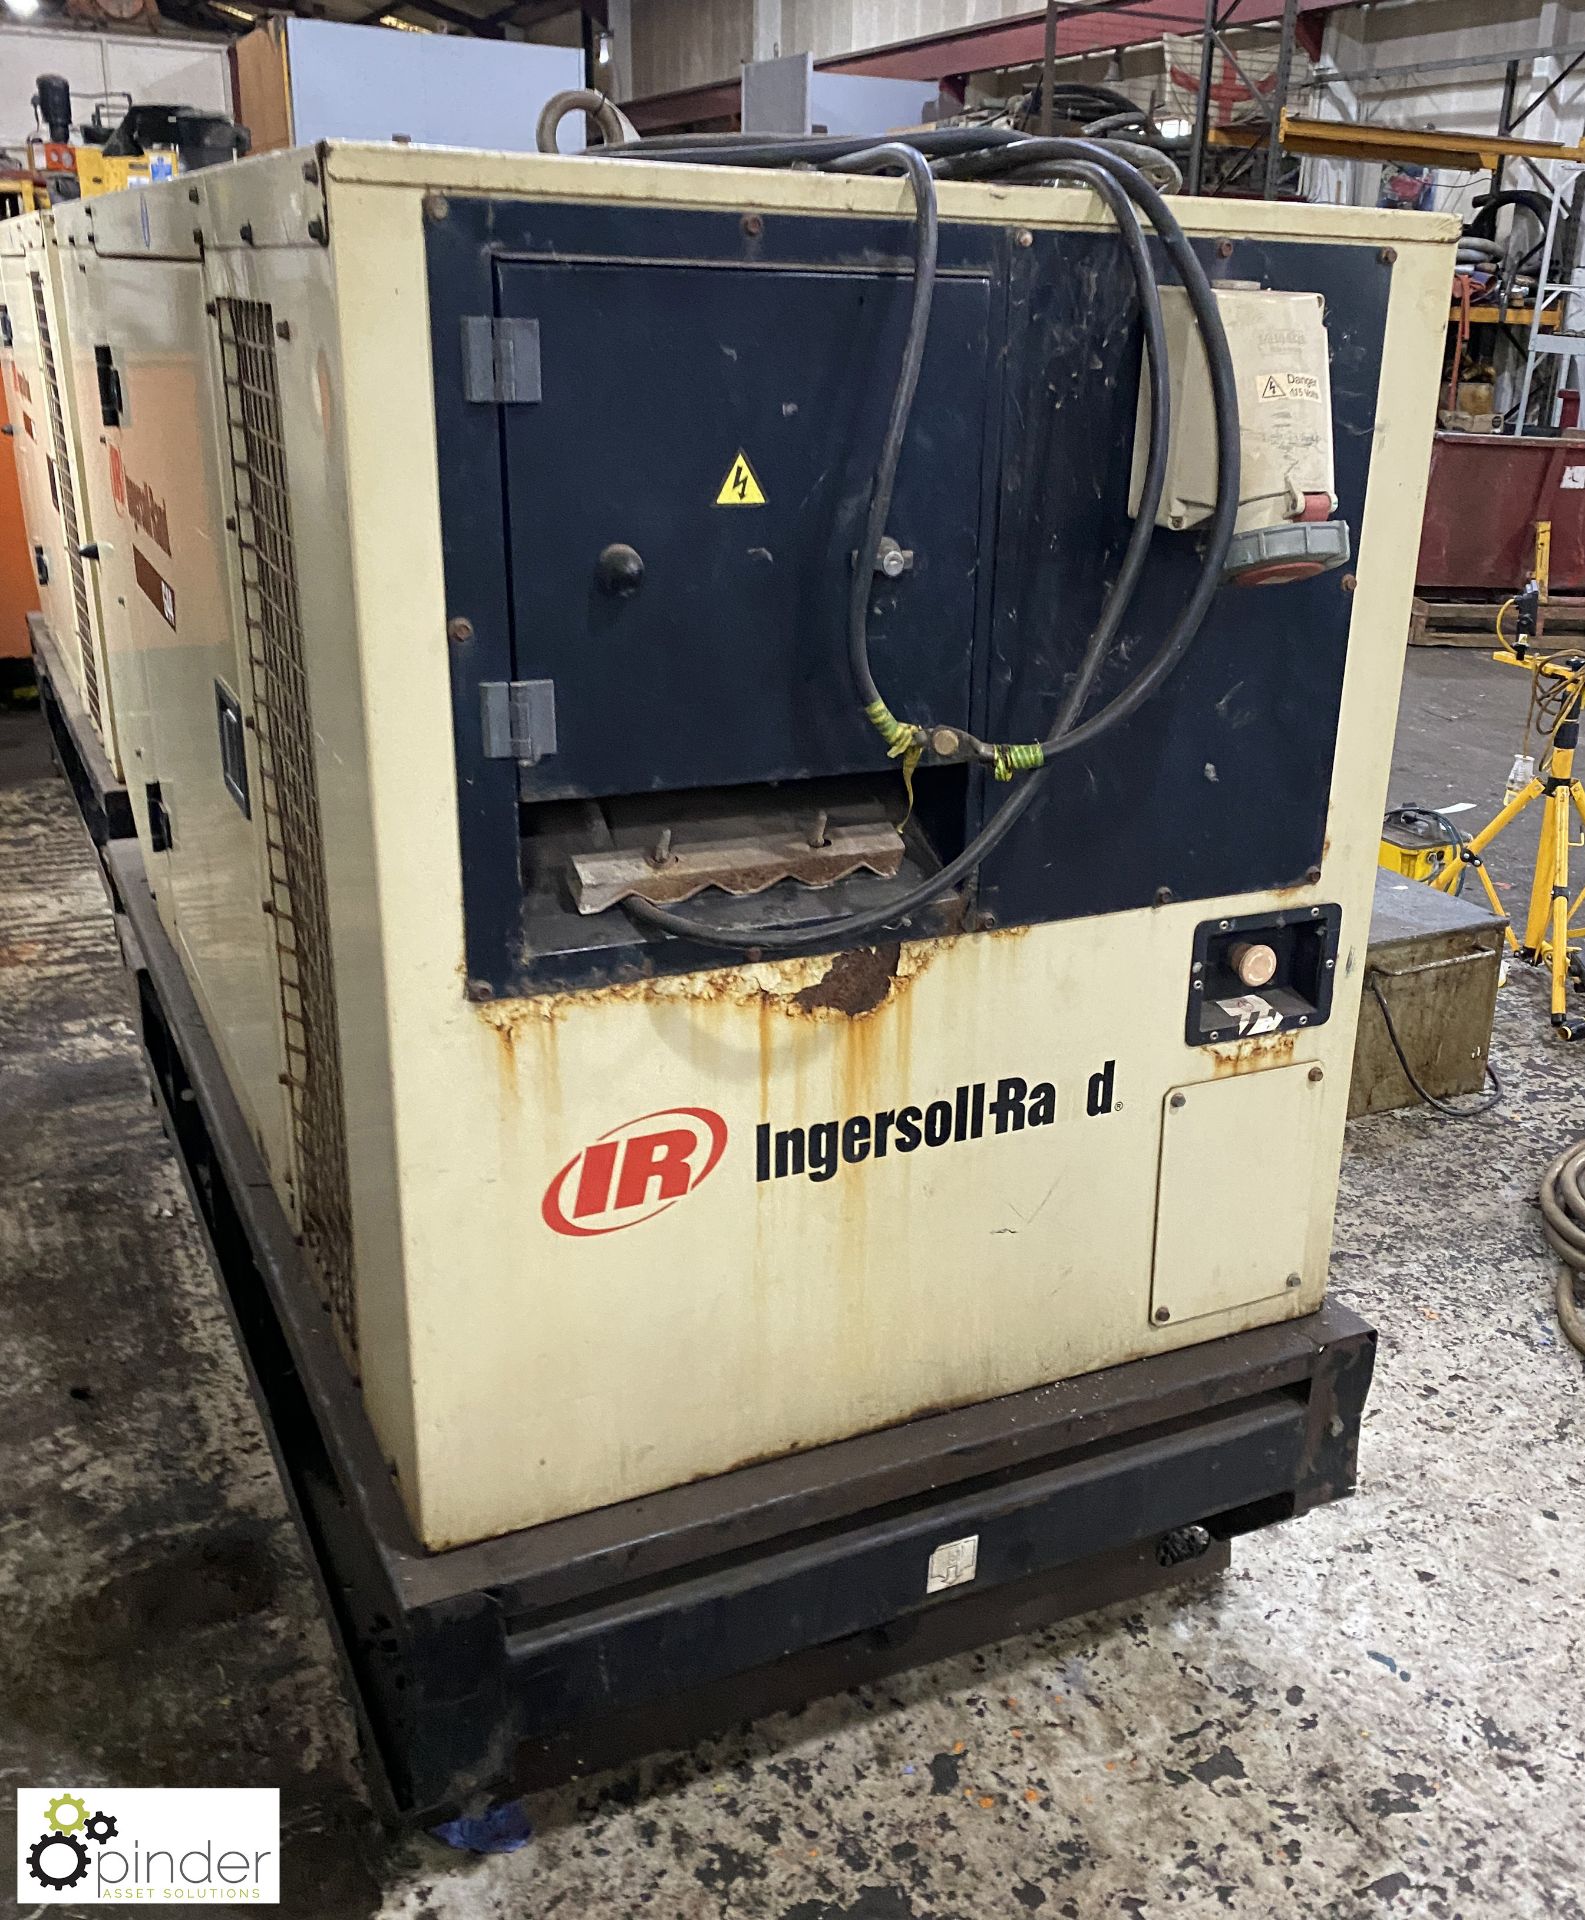 Ingersoll Rand G44 skid mounted Generator Set, 44kva, 37197hours, with acoustic cabinet - Image 9 of 11